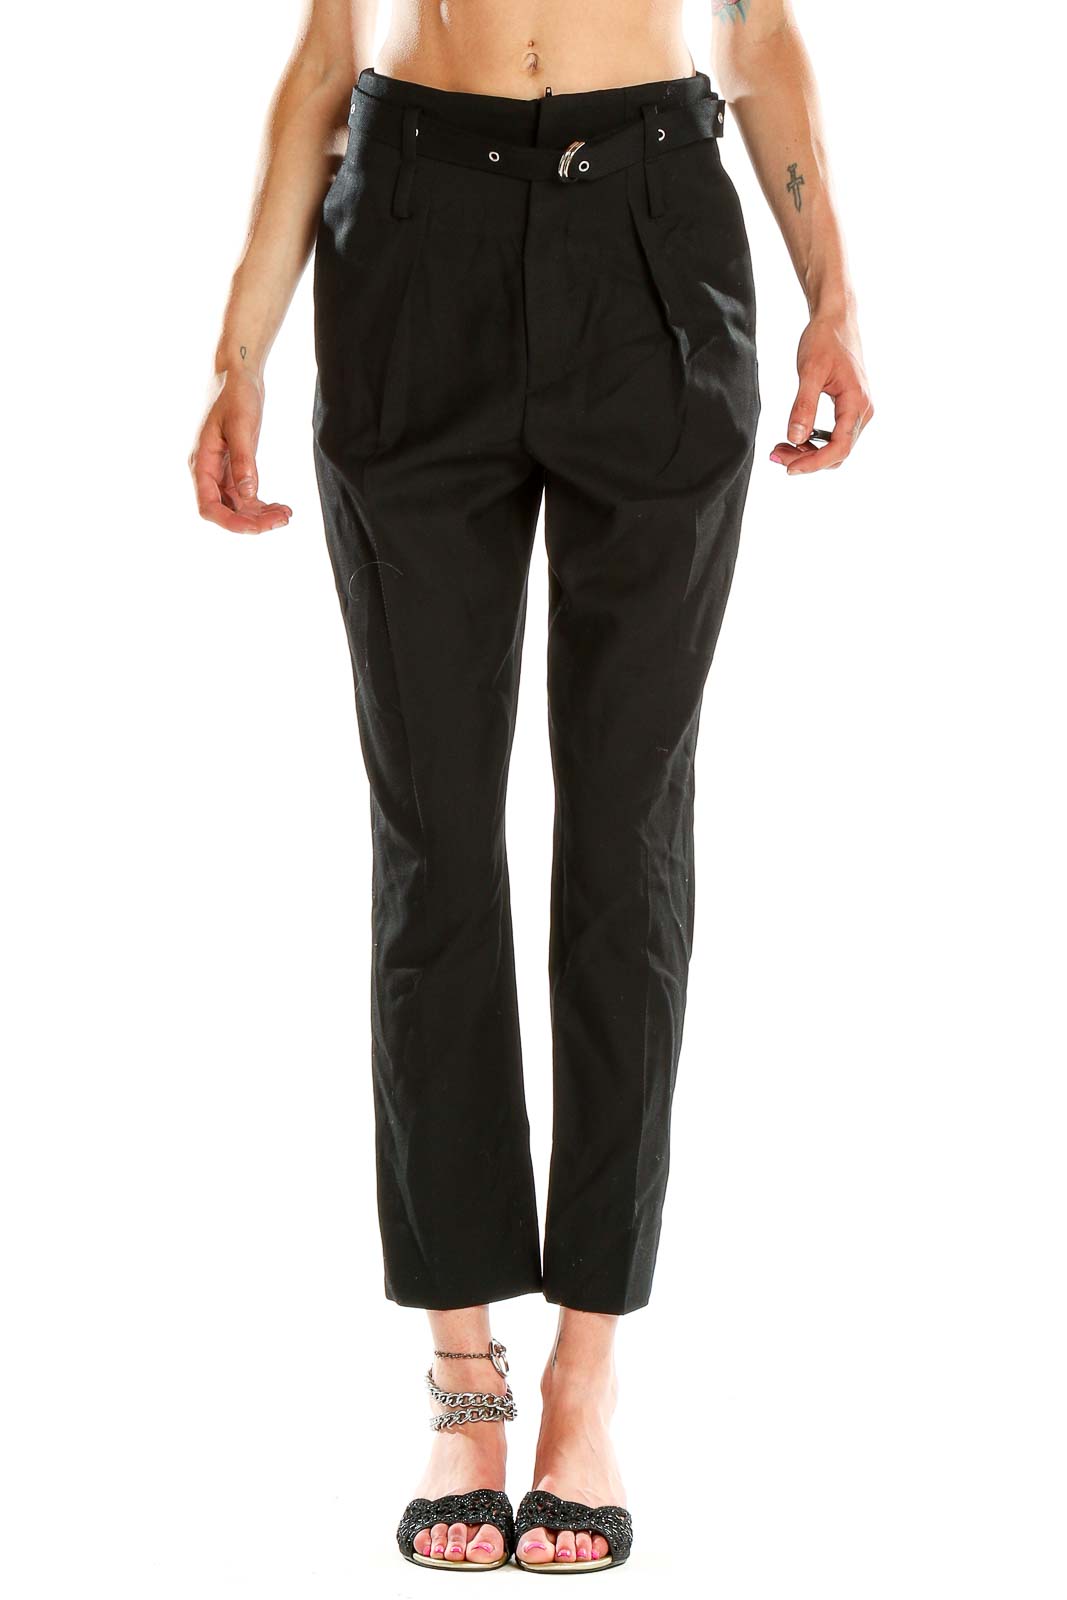 Black Chic Trousers Front